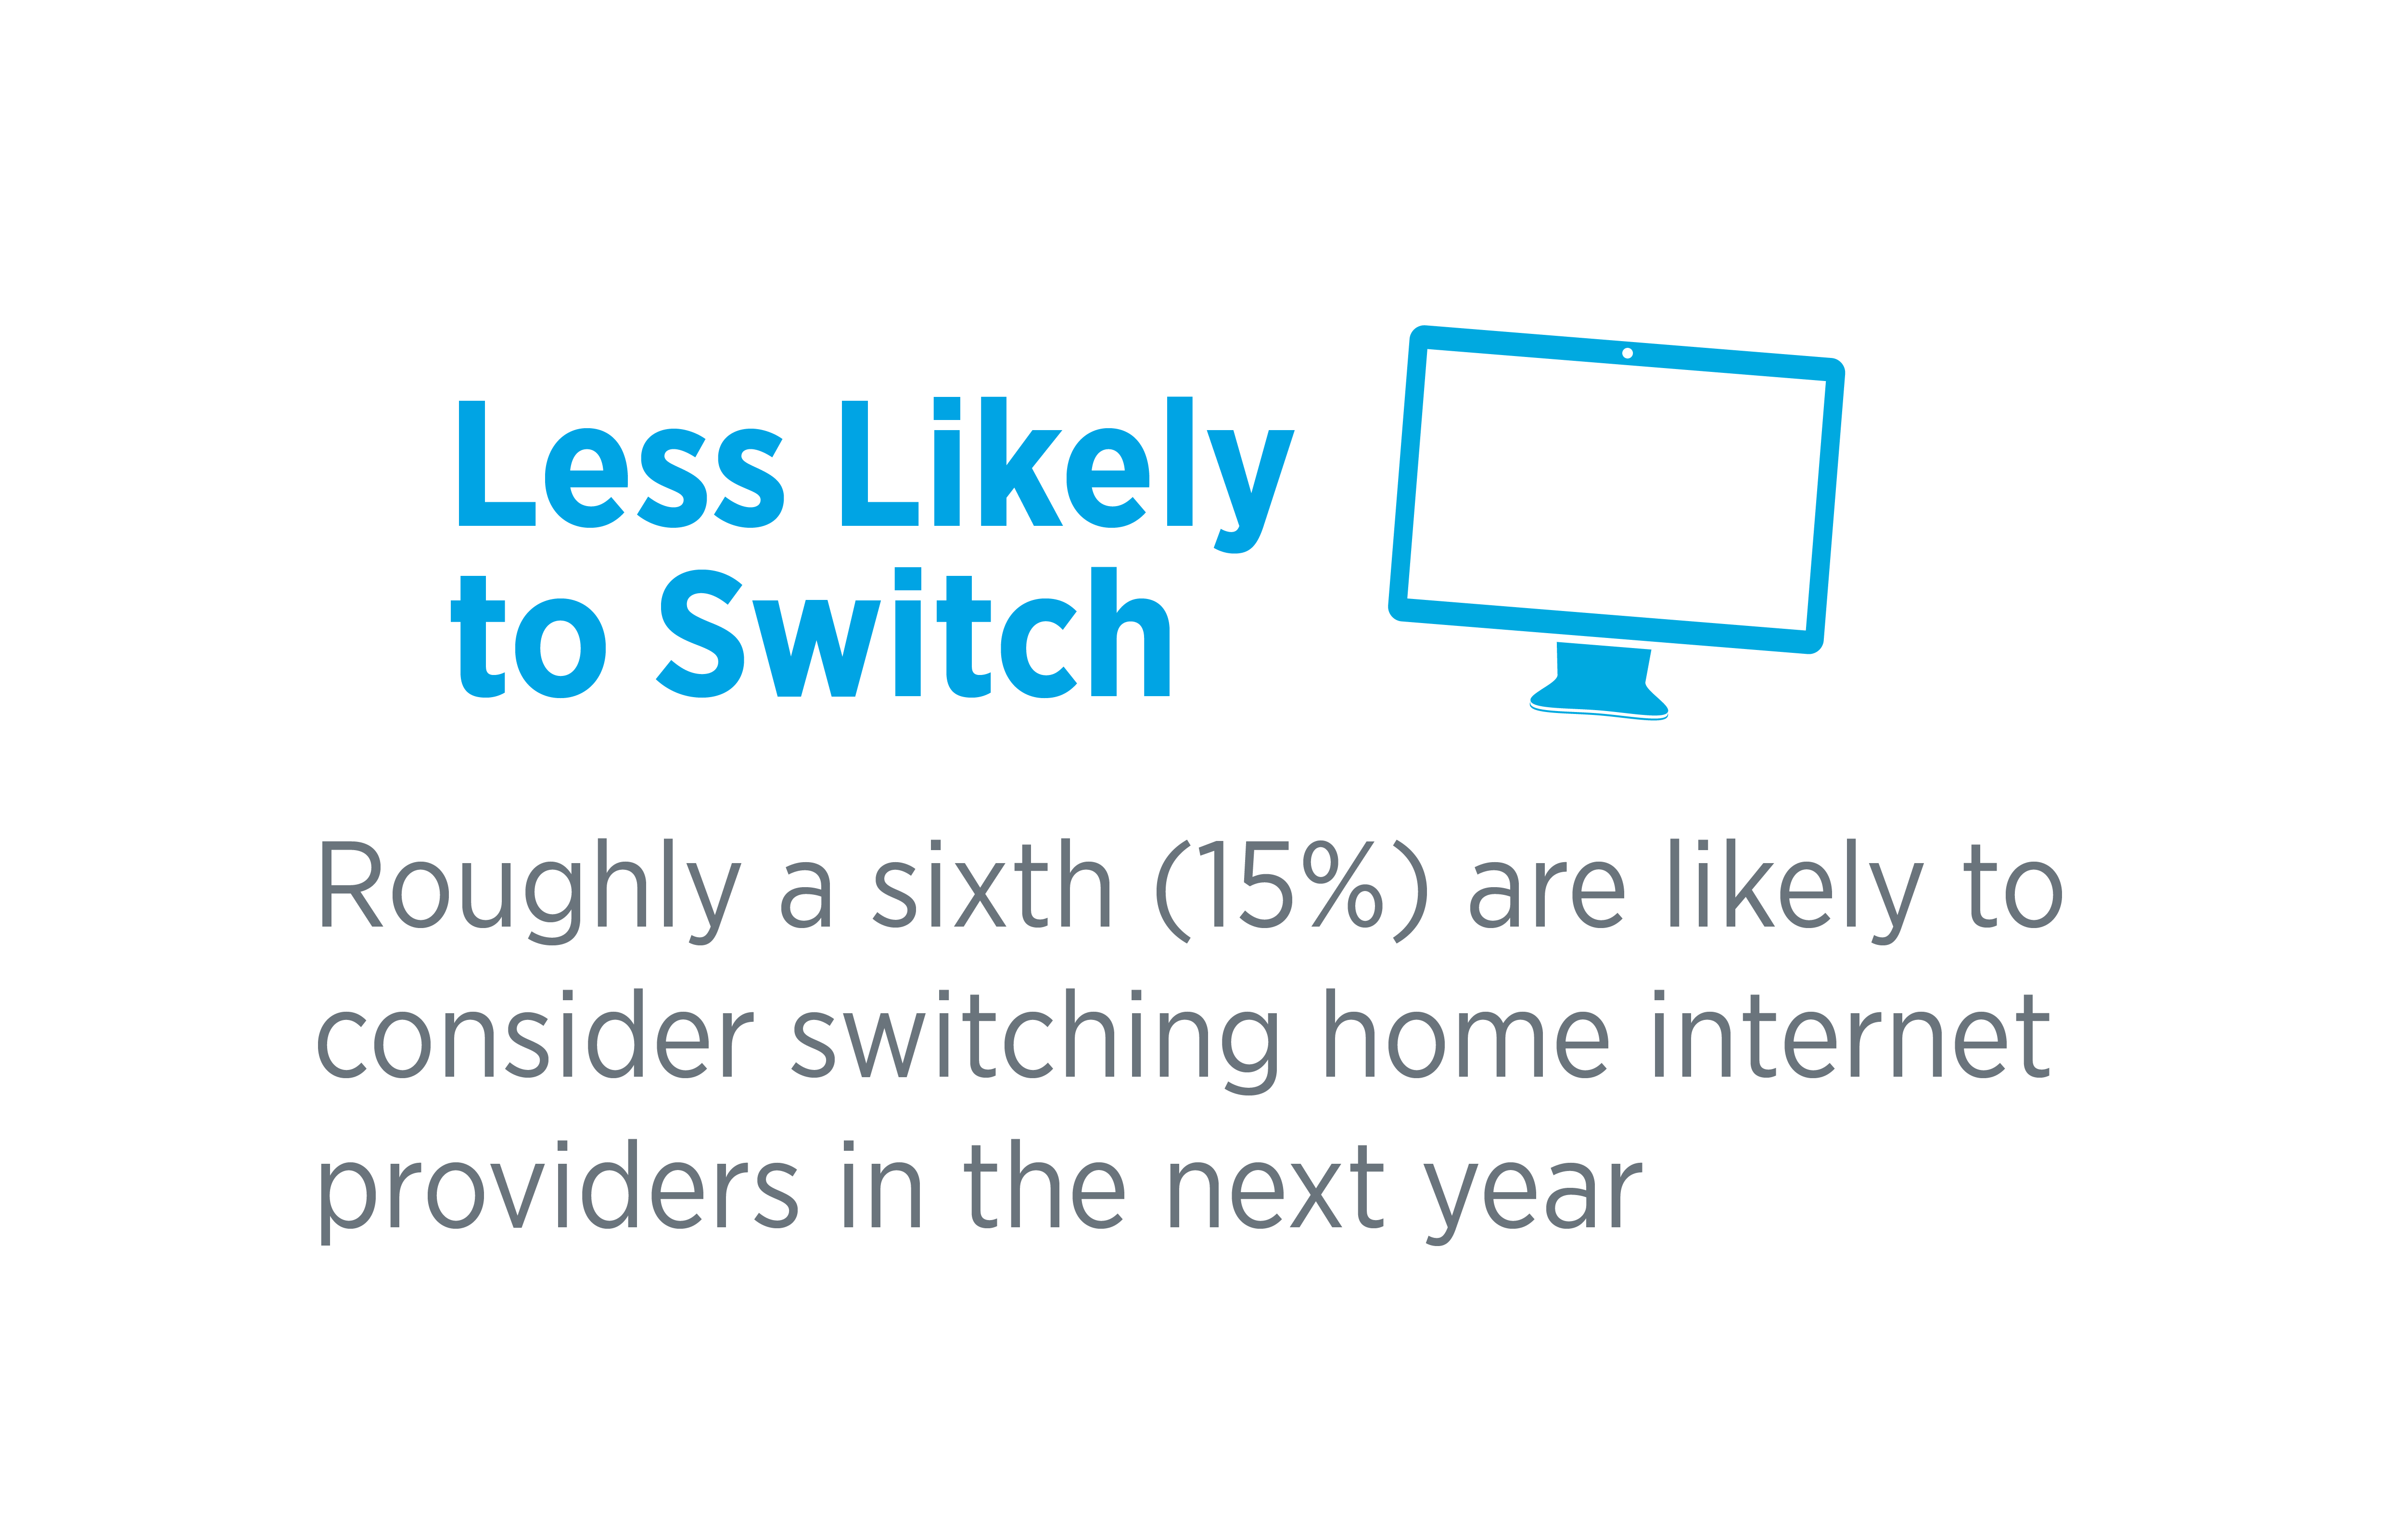 Less Likely to Switch